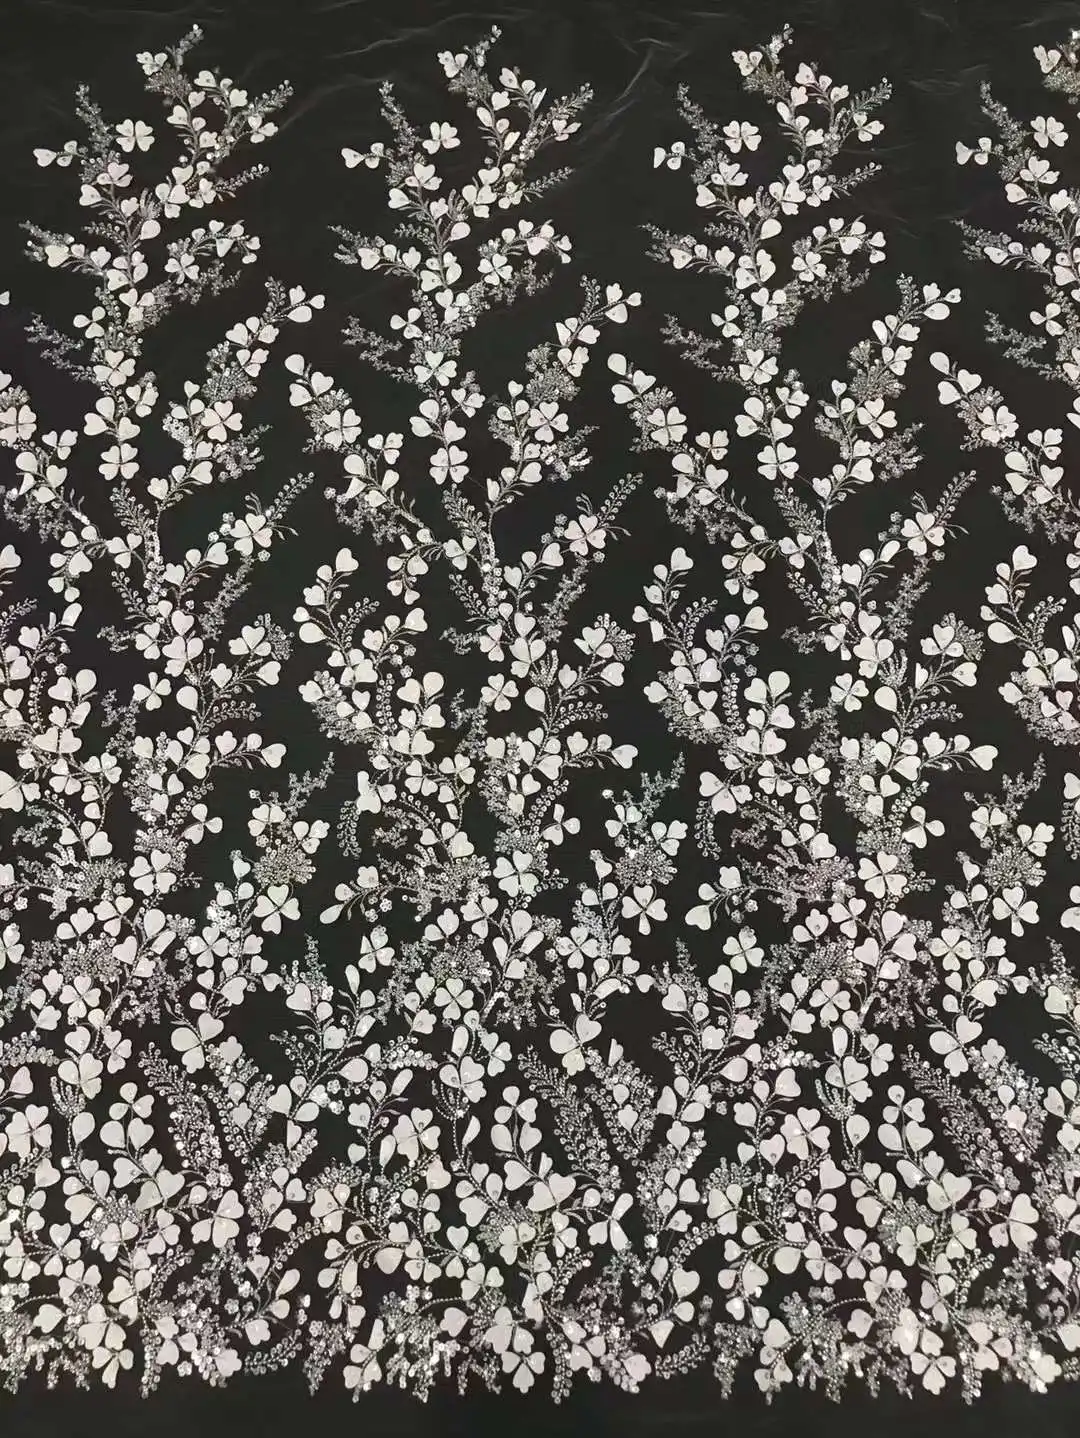 

High-quality wedding / dress design Fabric crystal sequins beads embroidery French mesh yarn beige lace fabric dress wedding fab